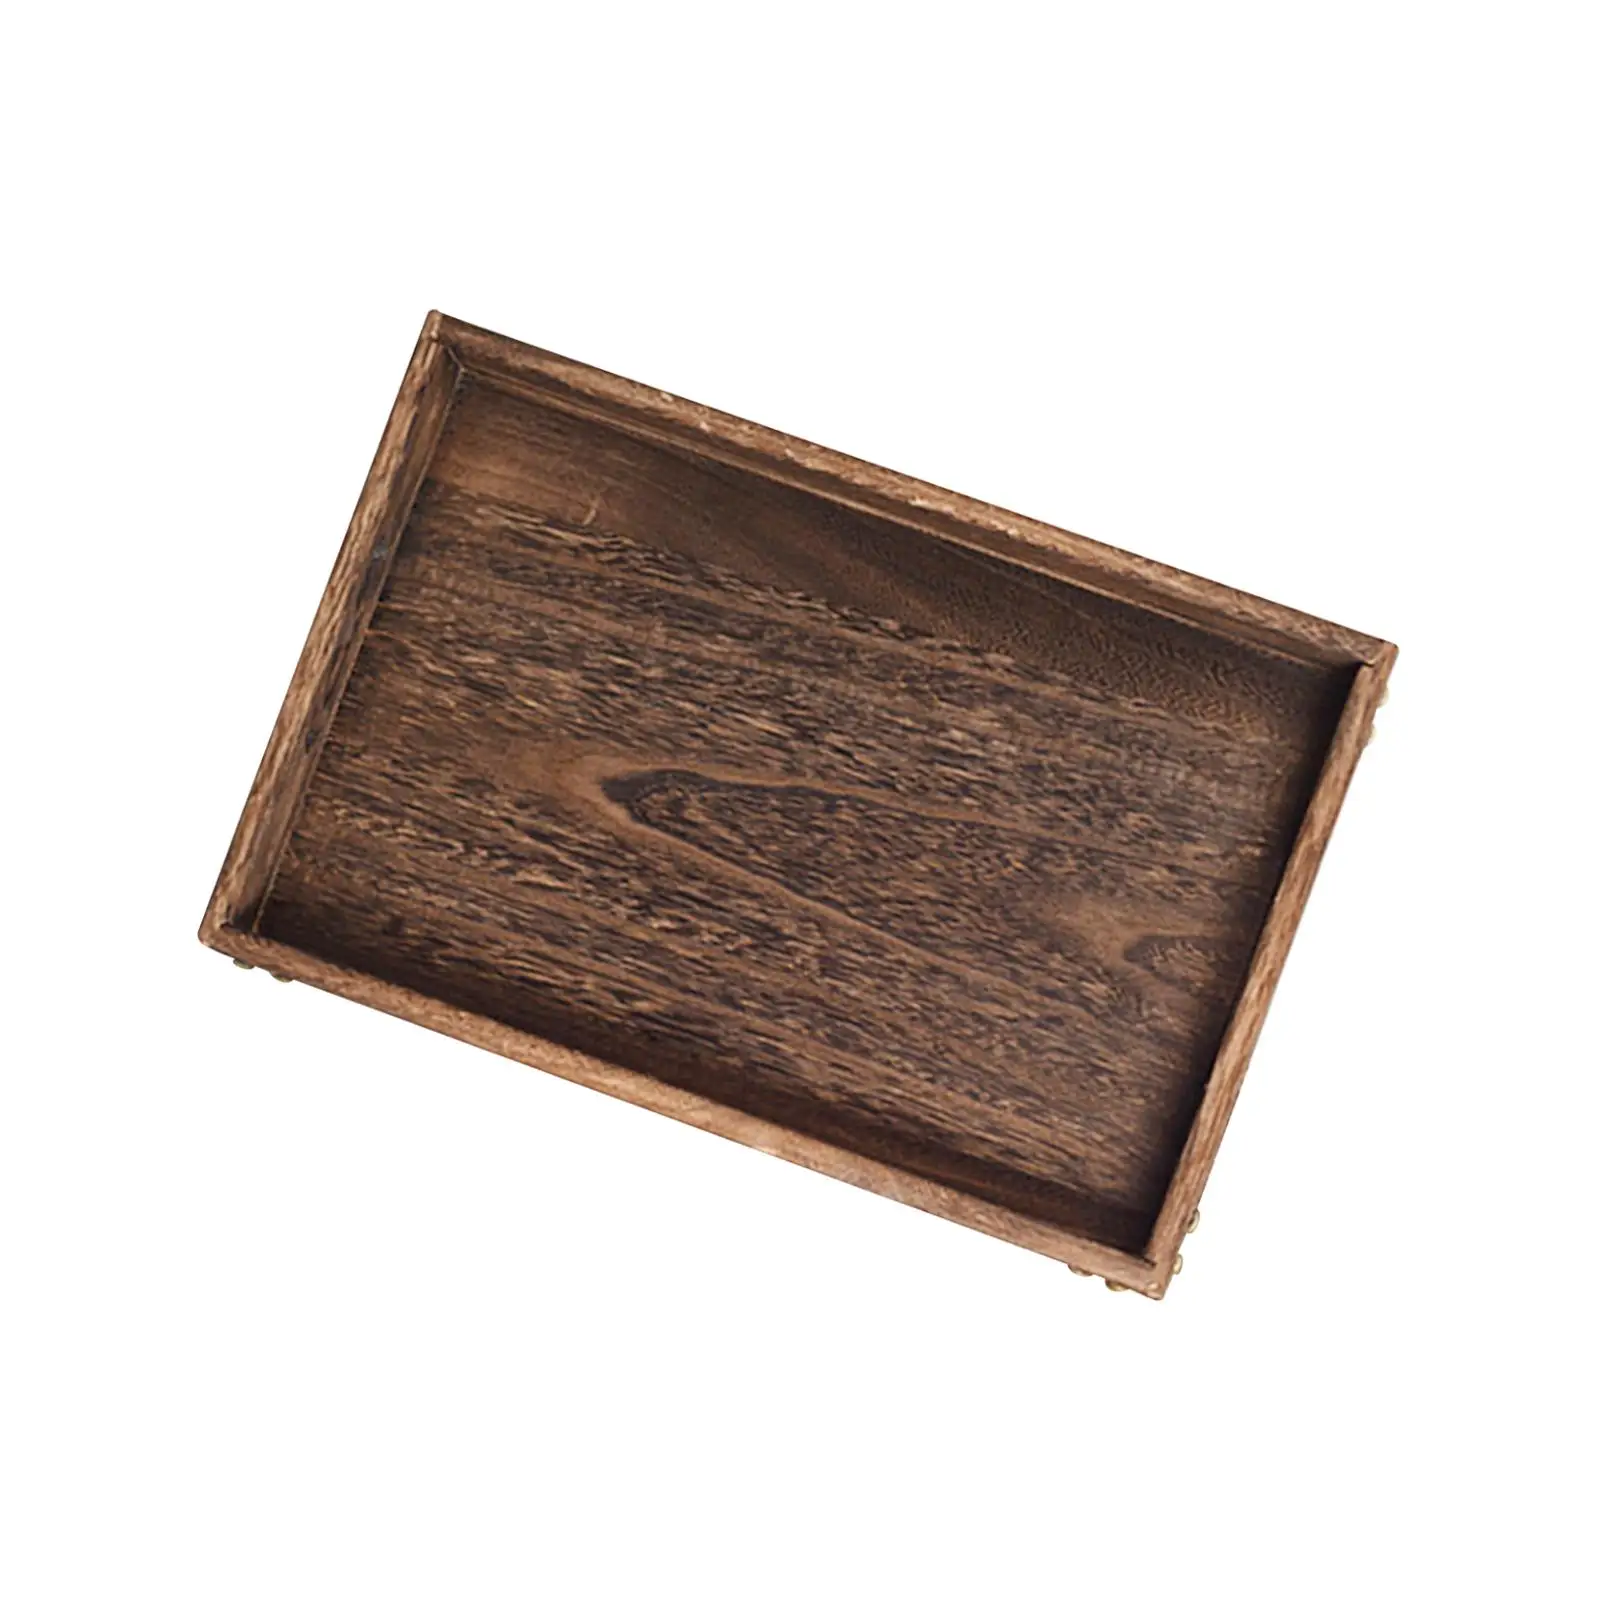 Wooden Serving Tray with Hollow Handle Eating Tray Practical for Living Room, Bathroom or Desk Drawer Multifunctional Decorative